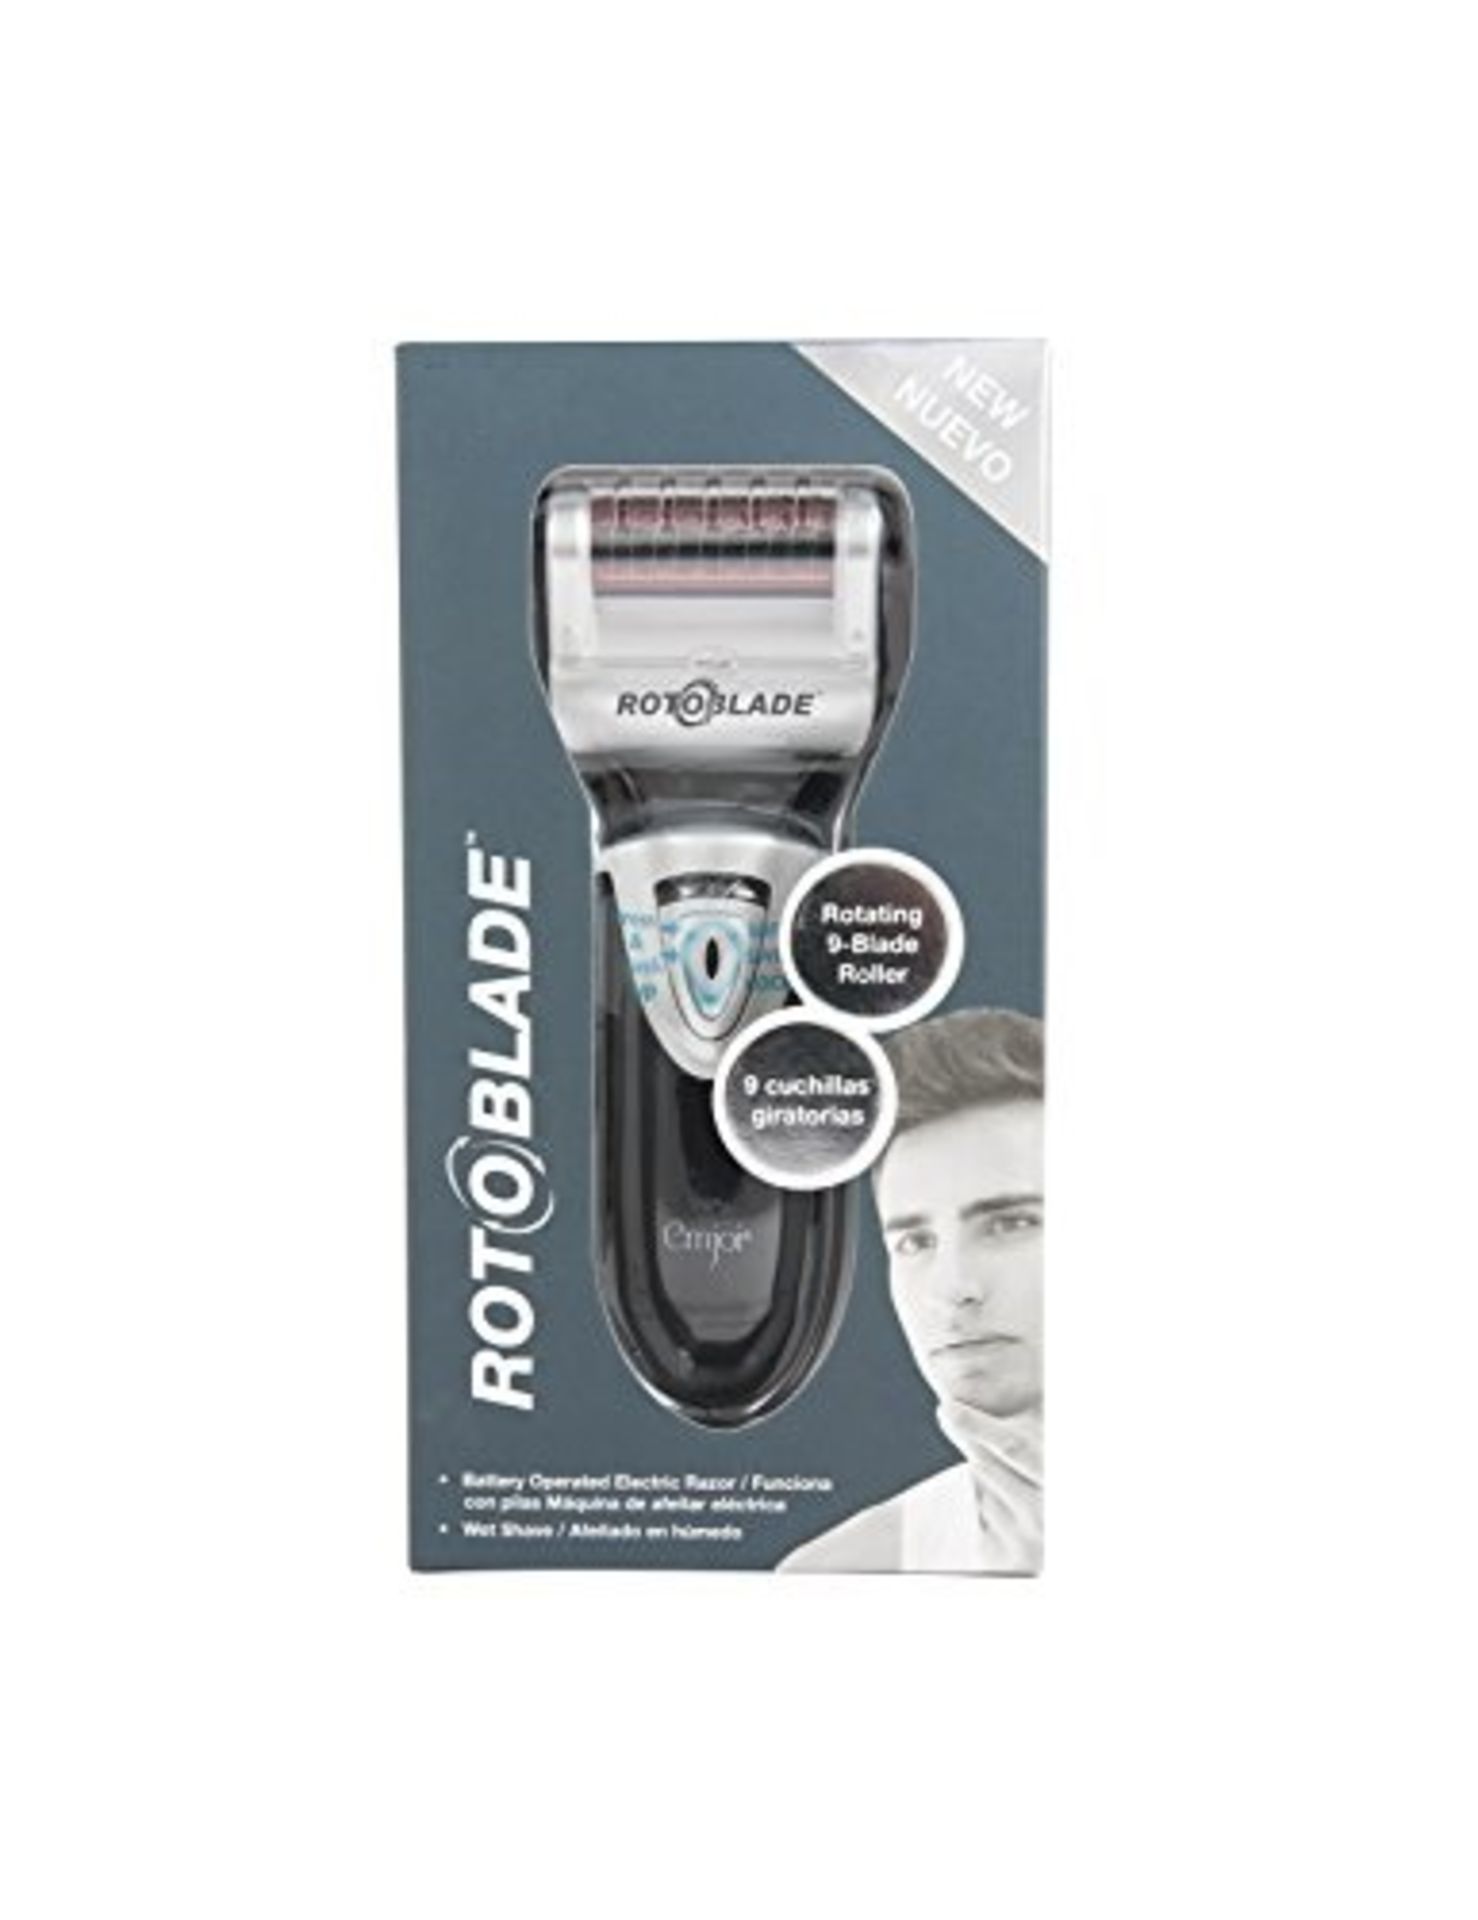 V Brand New RotoBladed Waterproof Electric Razor 9 Rotating Blades at 30RPM CLoser Safer Faster - Image 2 of 2